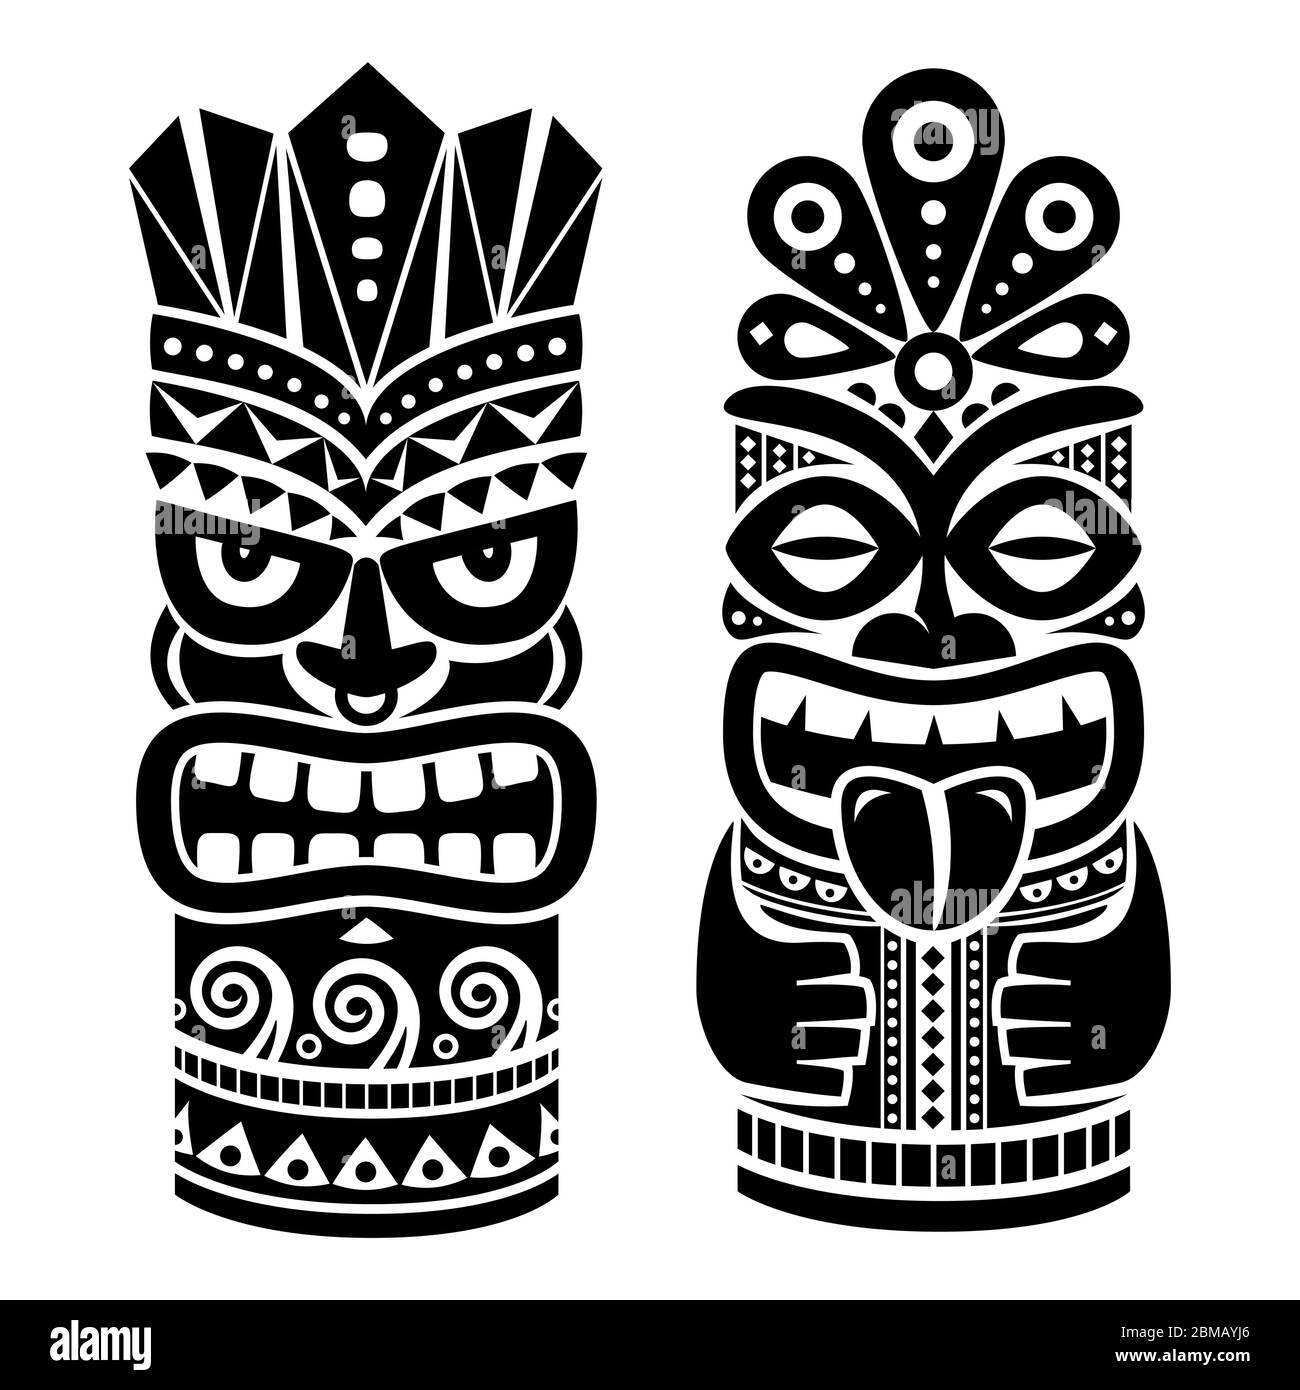 Tiki vector vectors Black and White Stock Photos & Images - Alamy